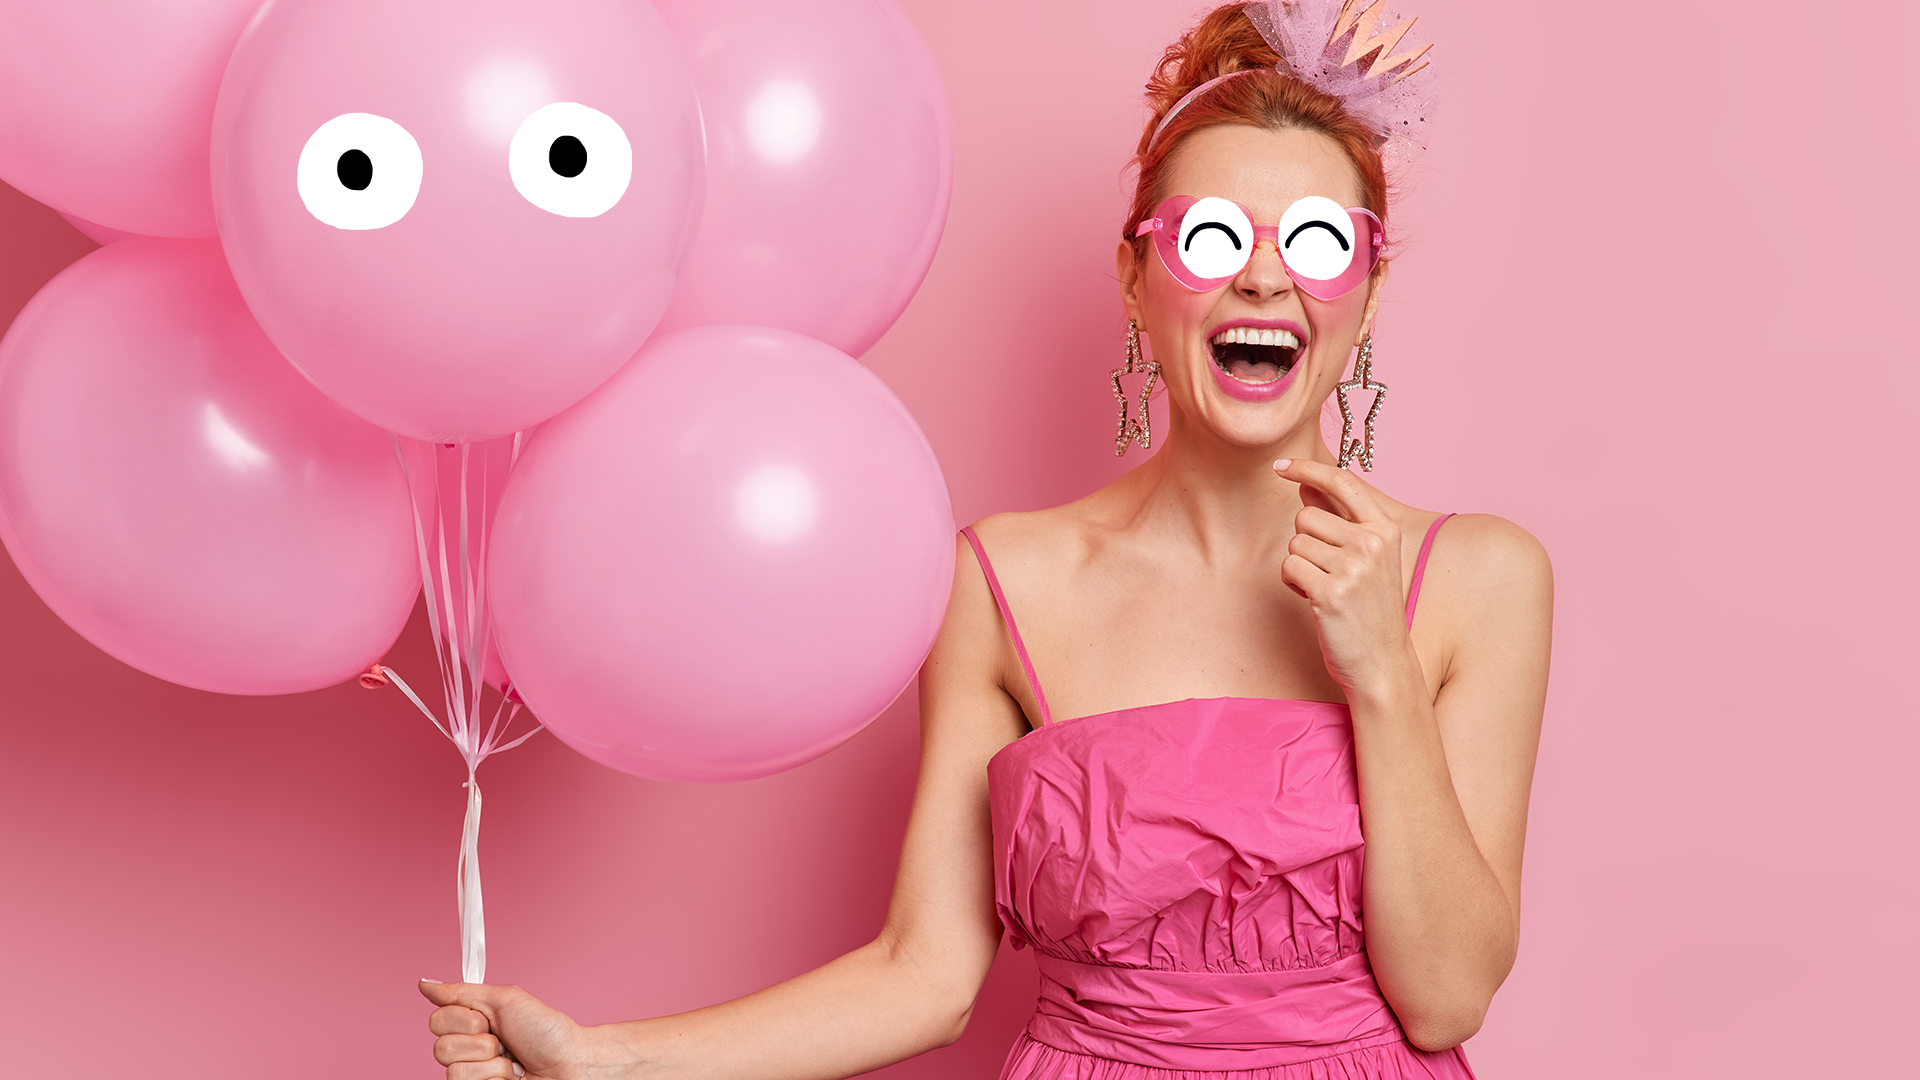 Woman in pink holding balloons